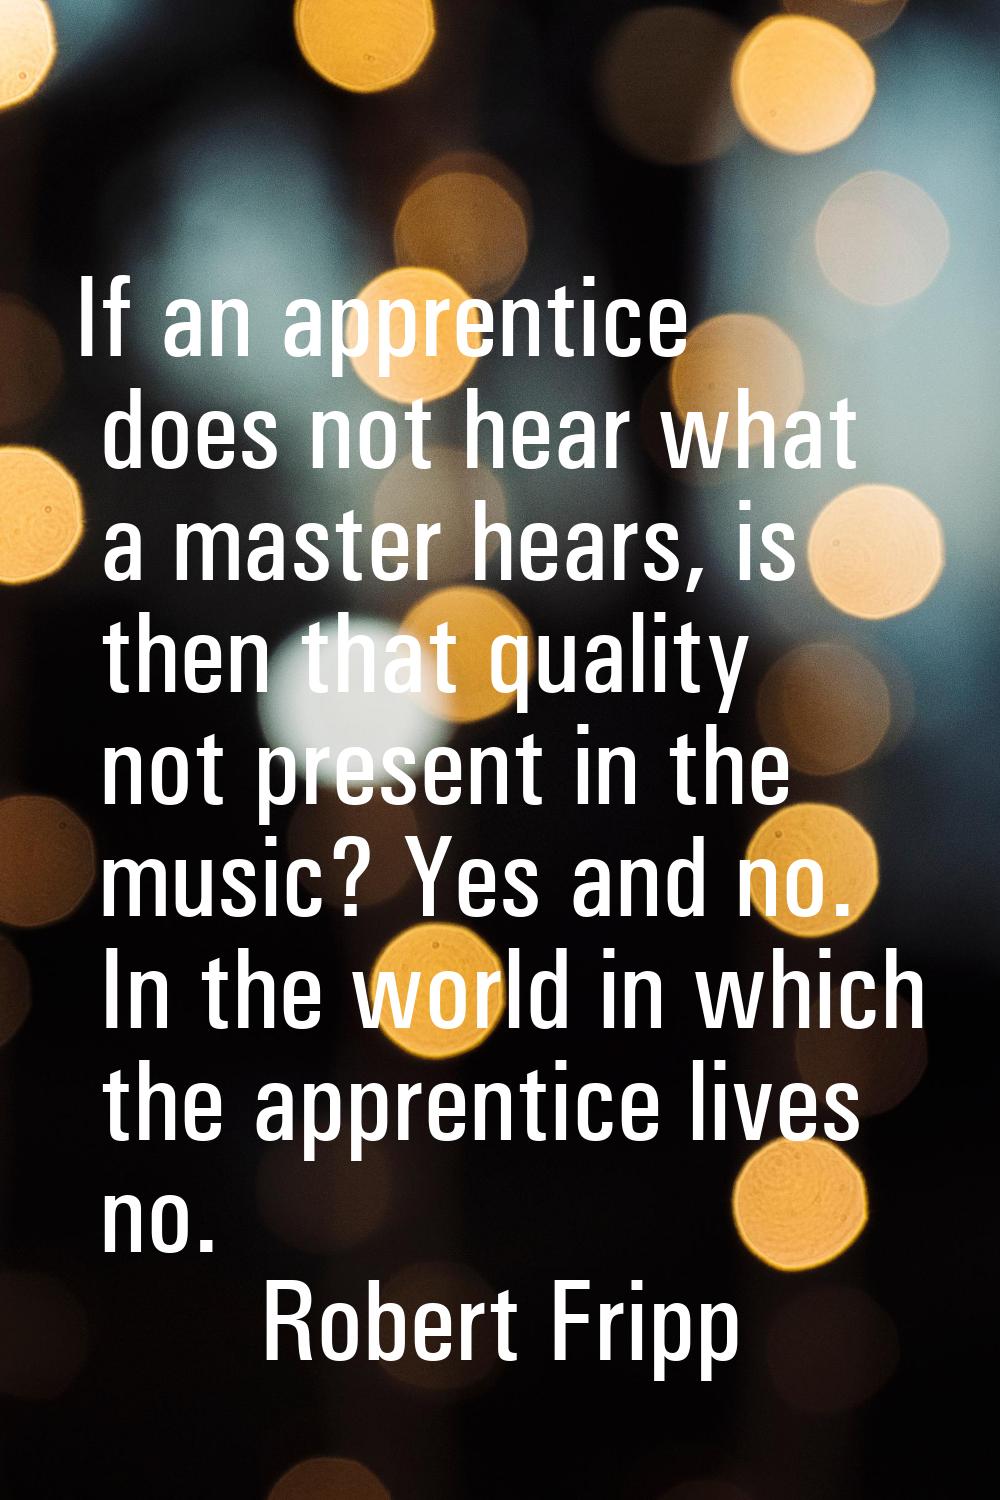 If an apprentice does not hear what a master hears, is then that quality not present in the music? 